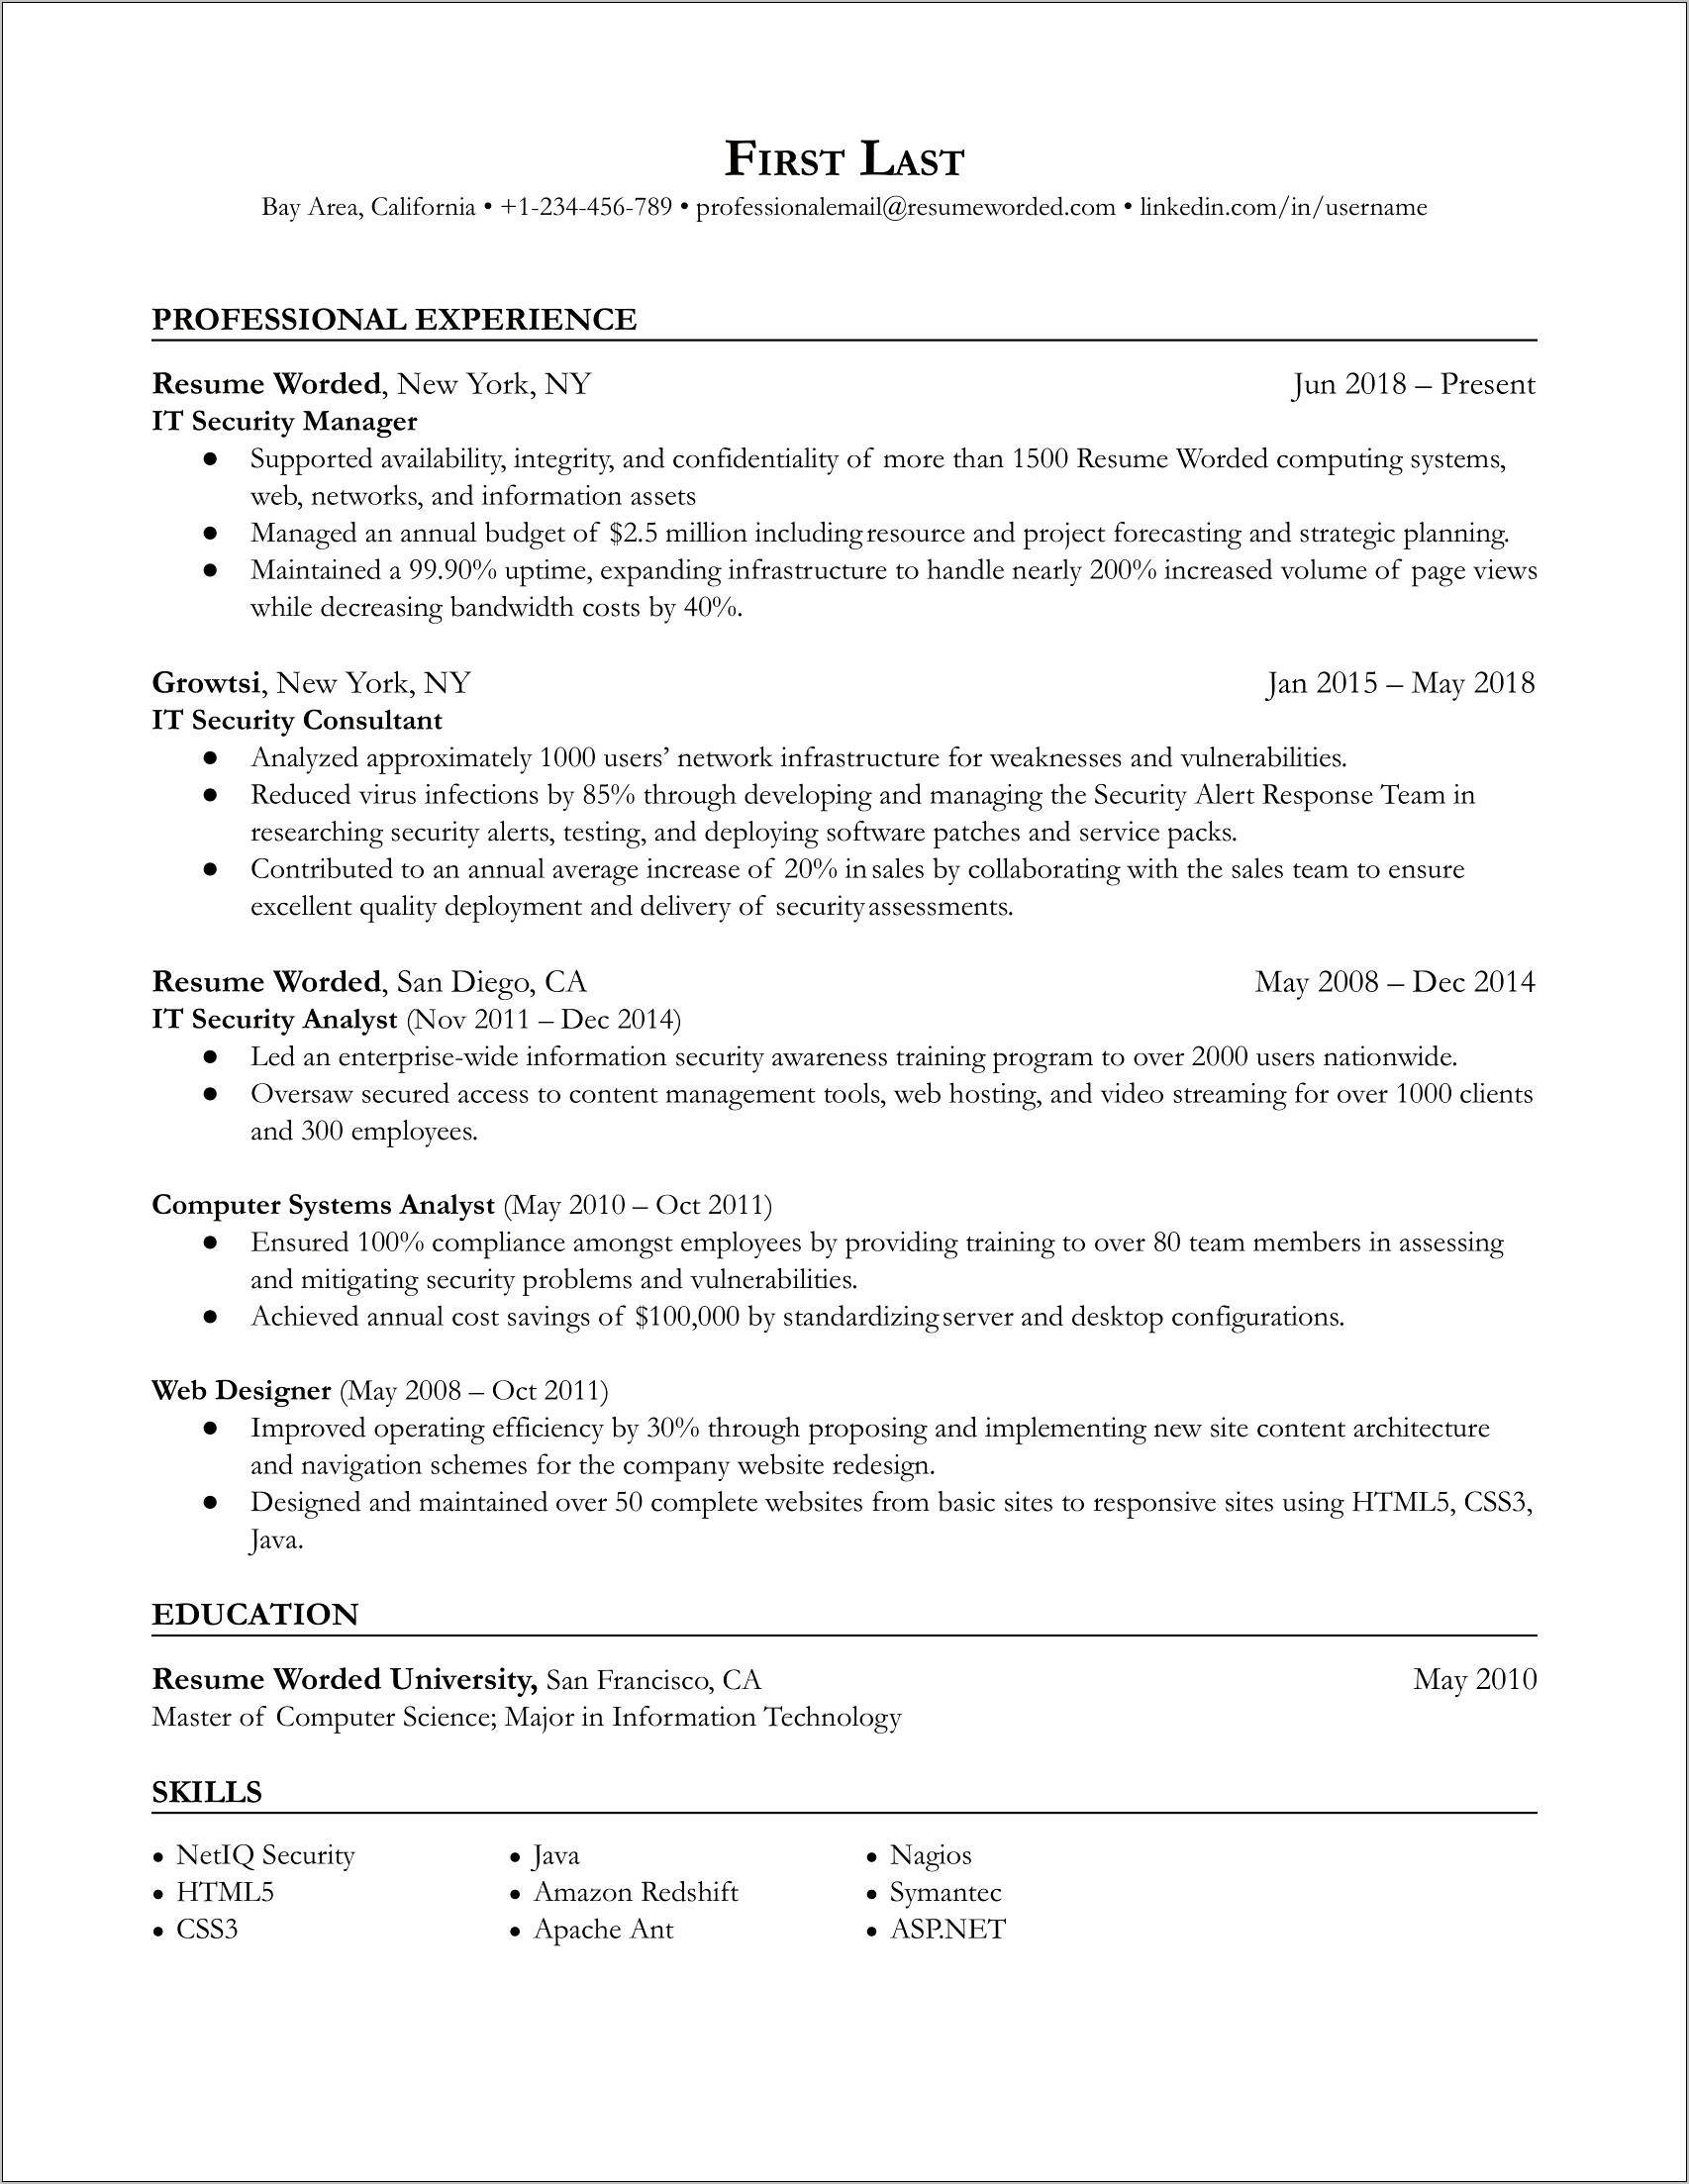 Resume Headline For Security Manager